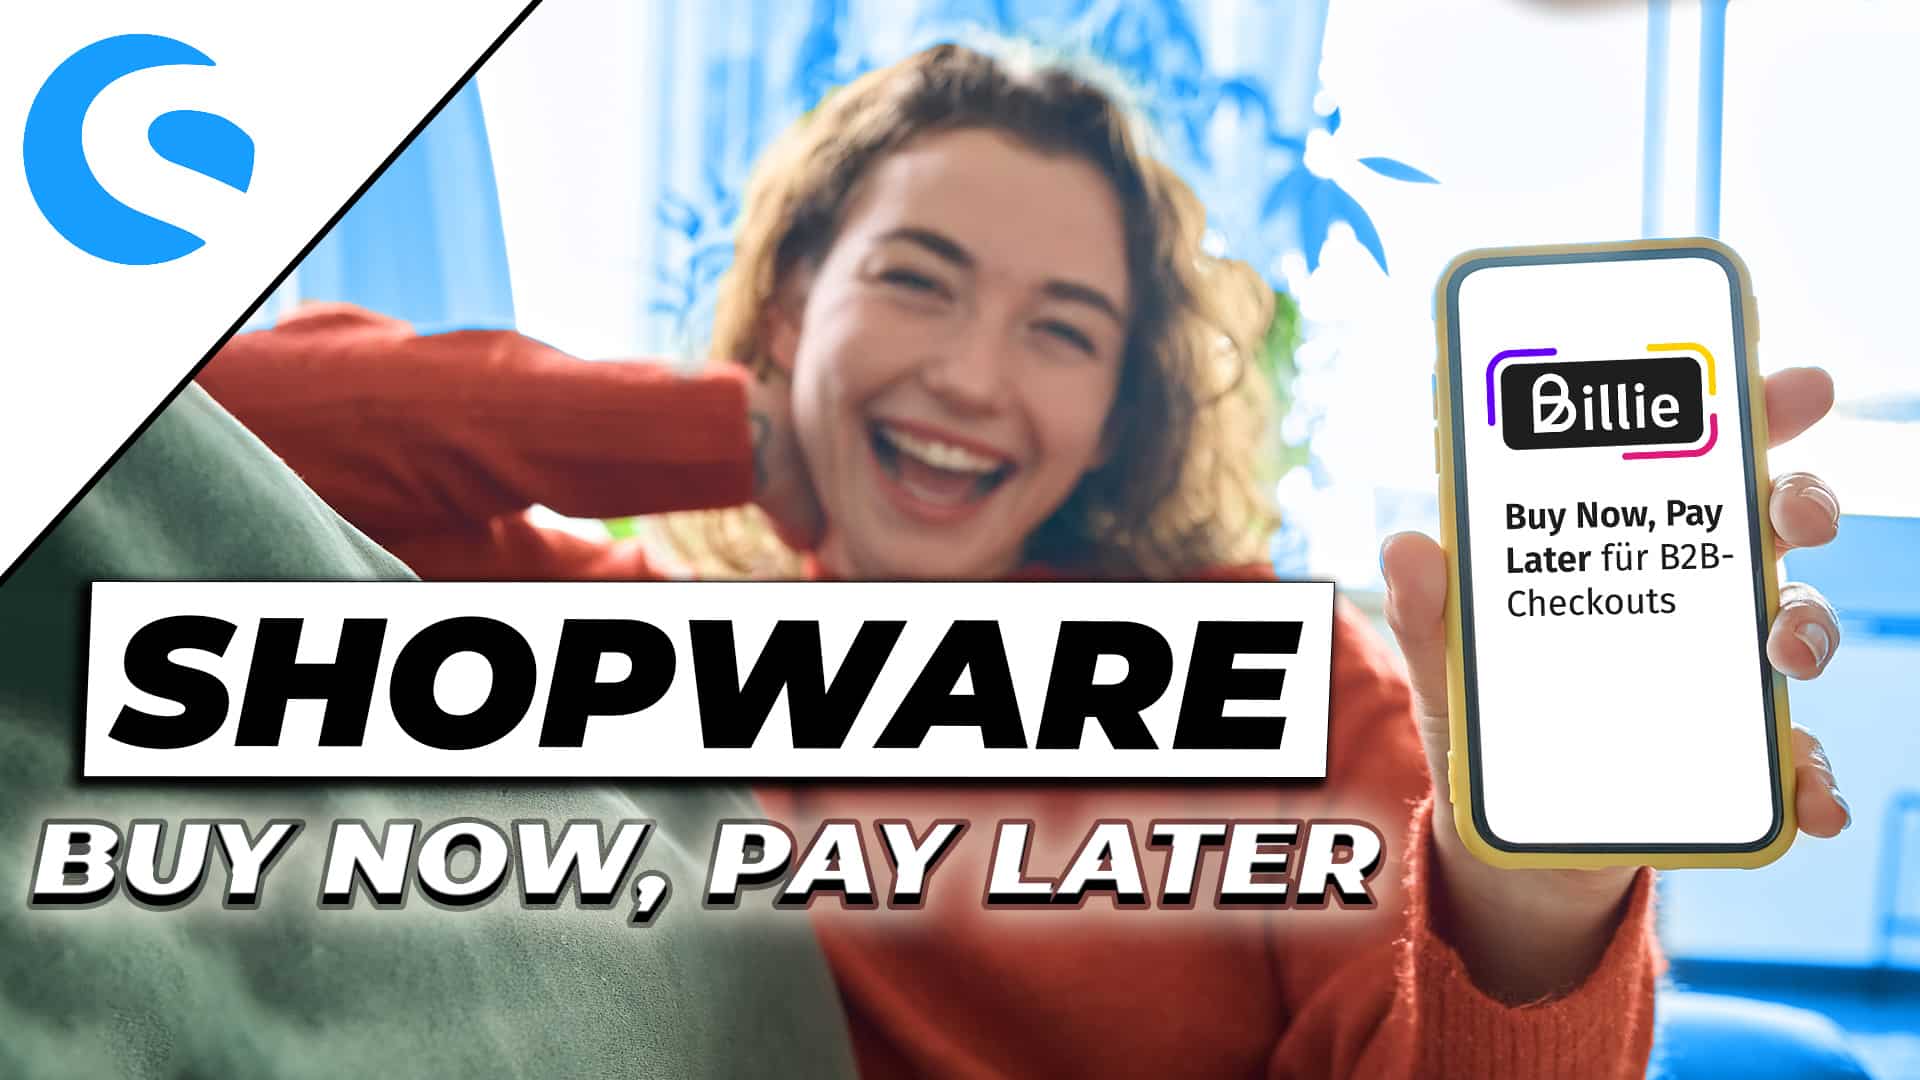 Shopware Buy Now, Pay Later B2B Solution – These are the advantages